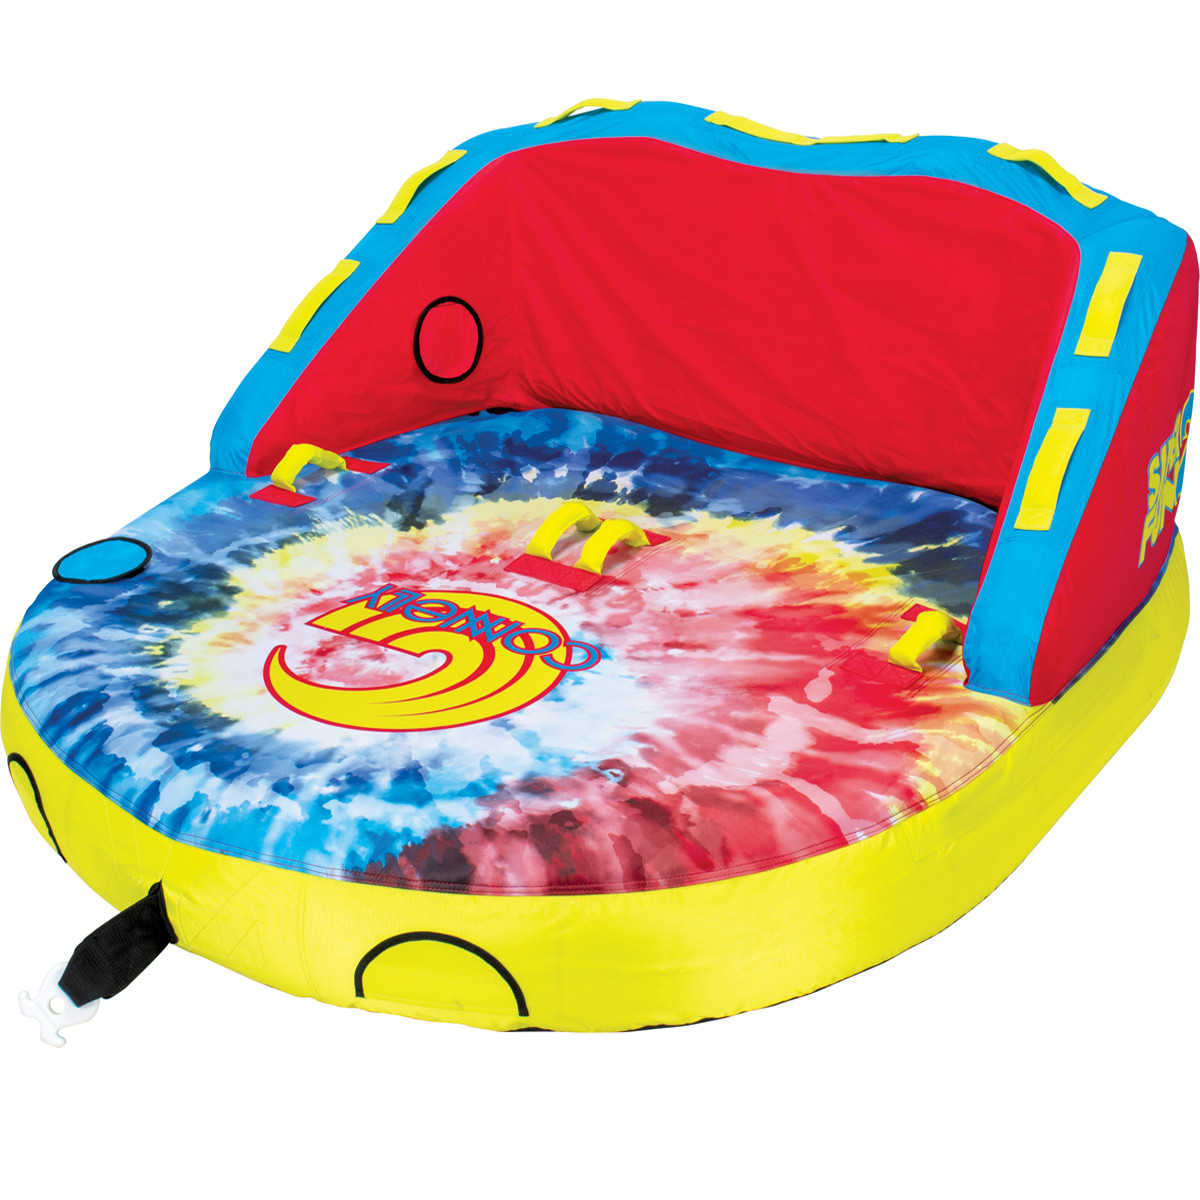 Connelly Fun 2-Person Towable Tube